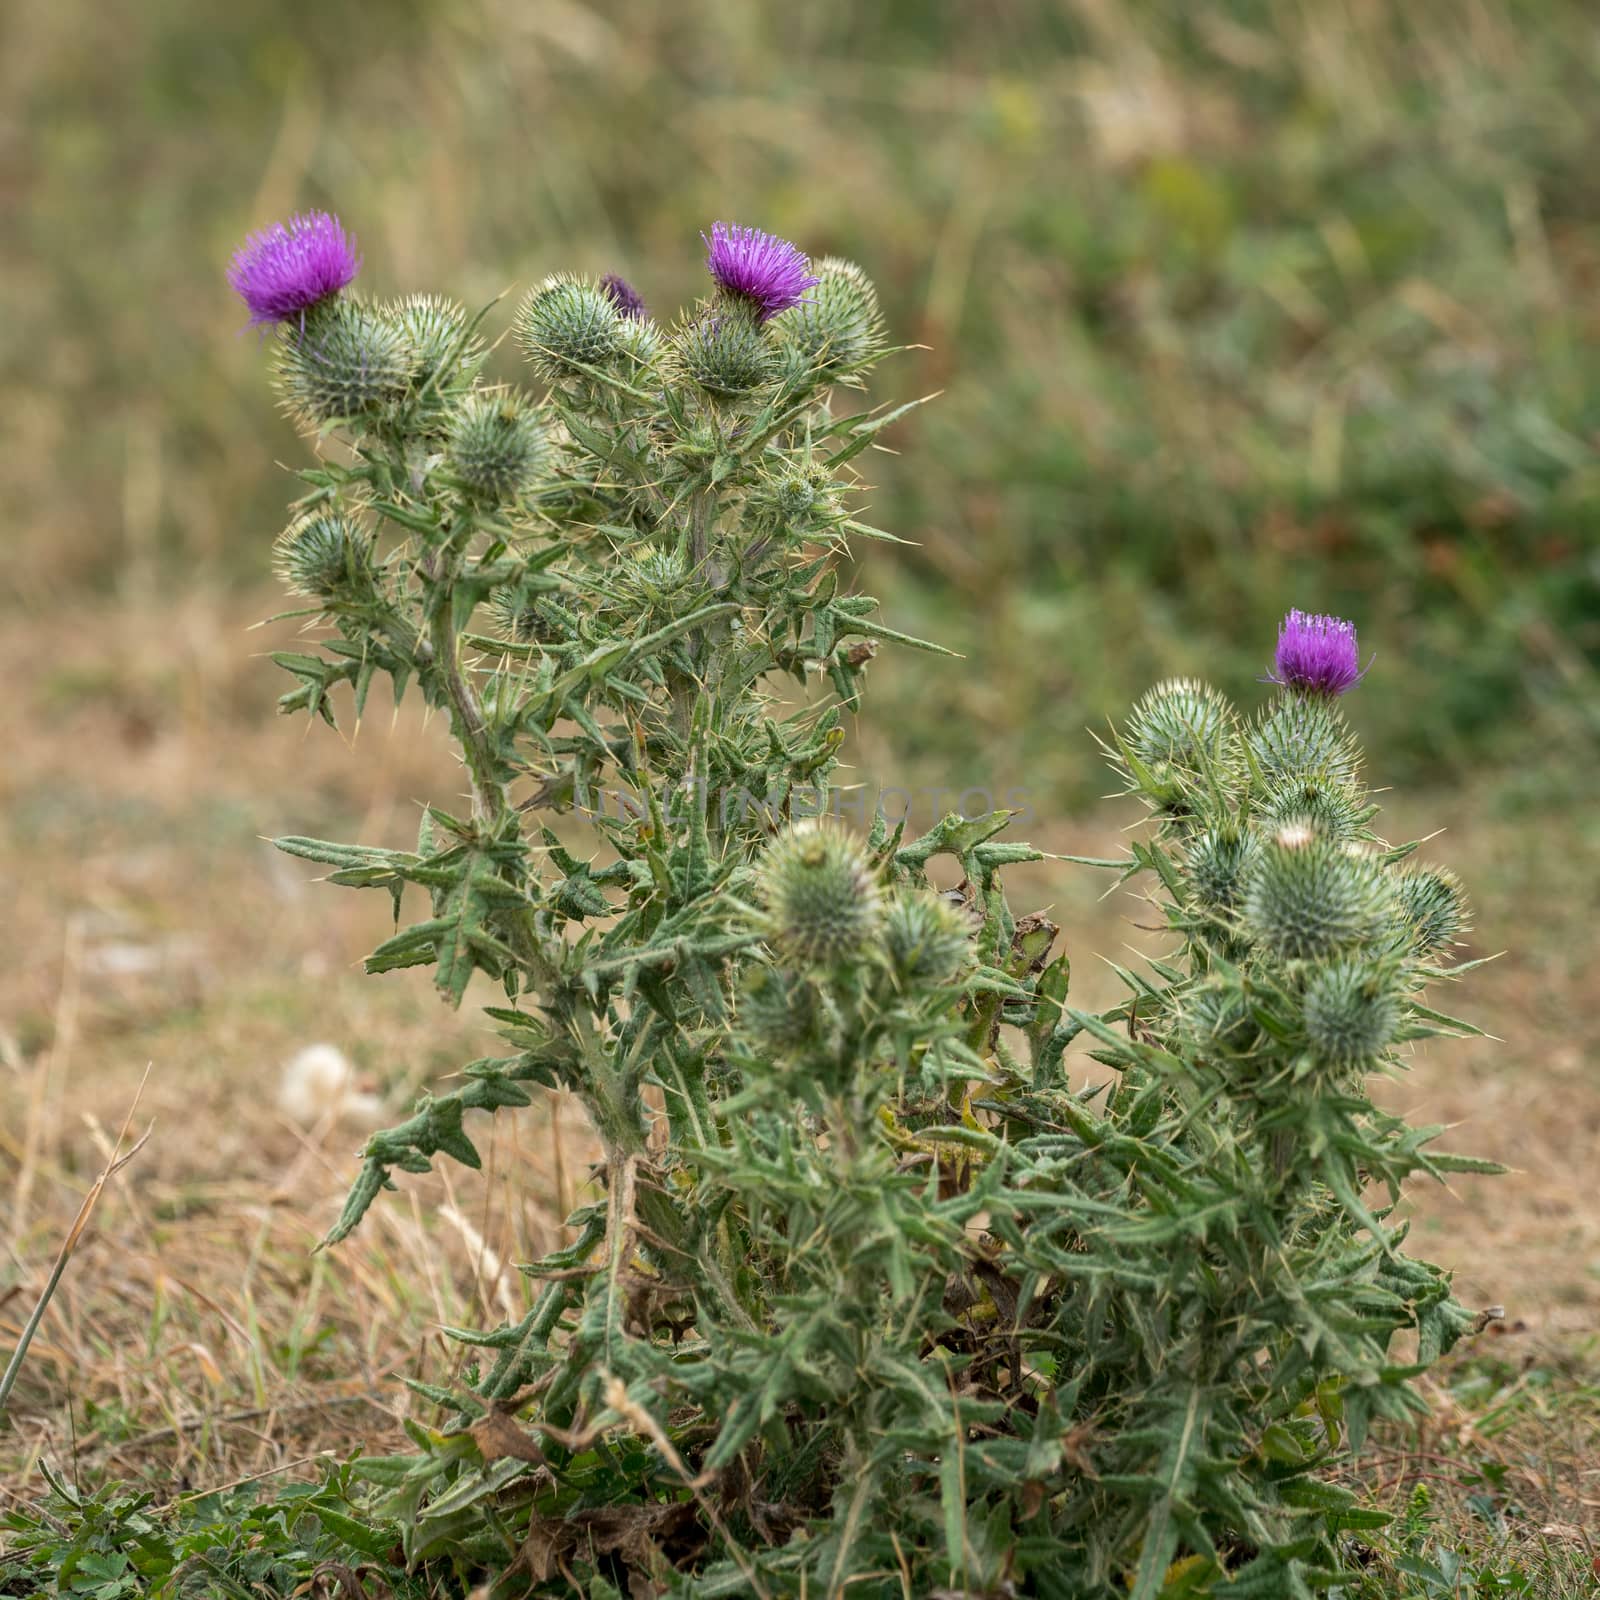 Spear Thistle (Cirsium vulgare) flowering in the Sussex countryside